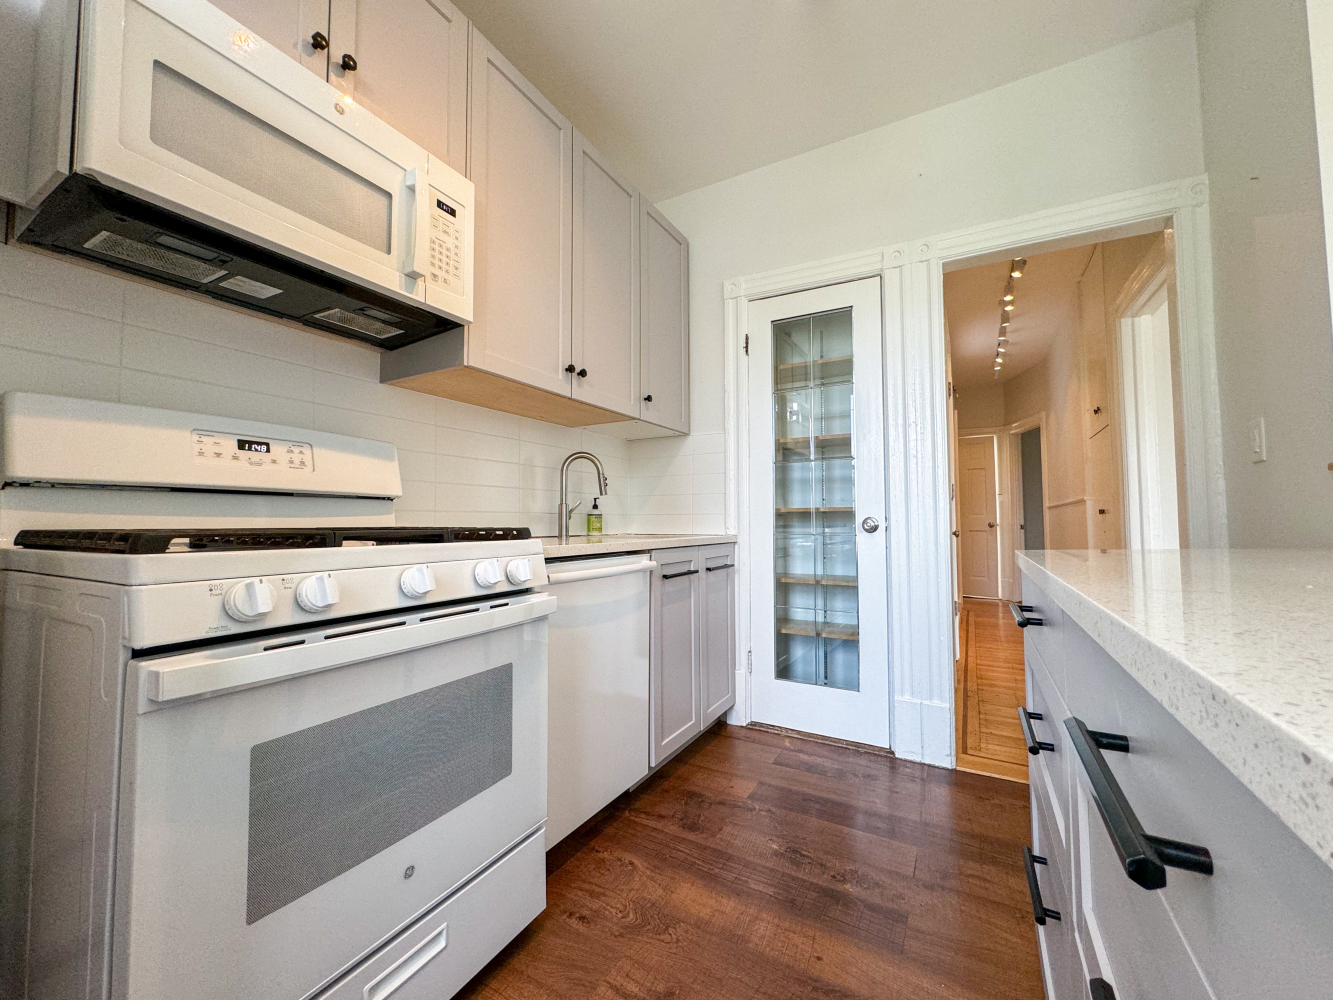 a kitchen with granite countertop cabinets stainless steel appliances and a wooden floor